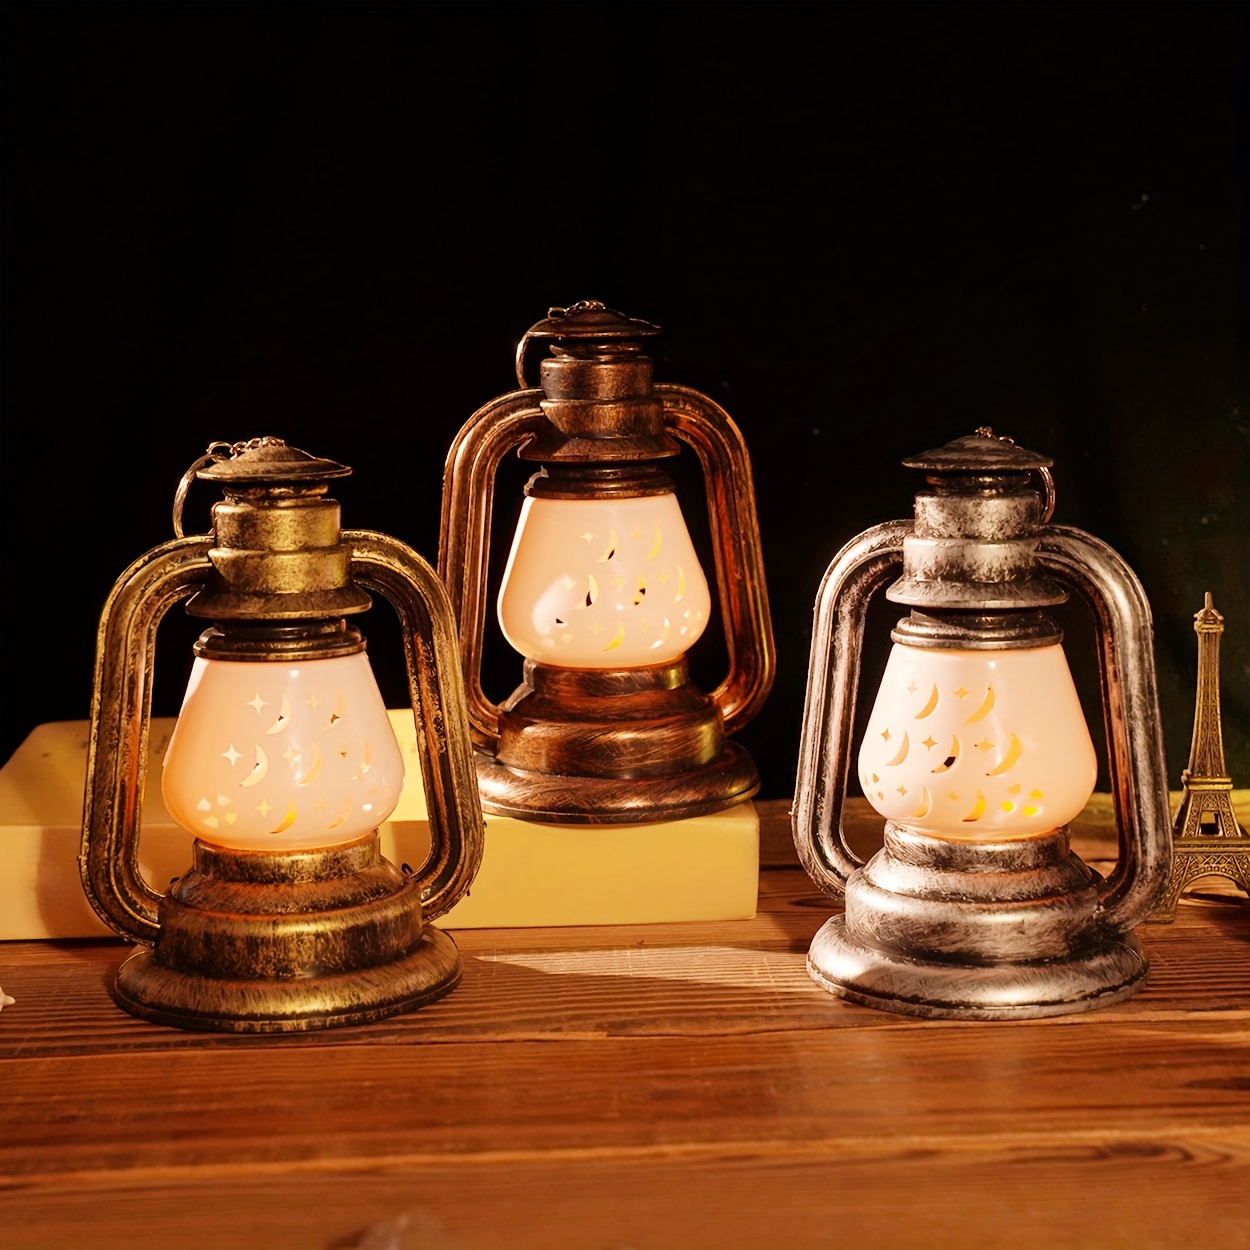 Retro Camping Lantern for Power Outages Indoor and Outdoor